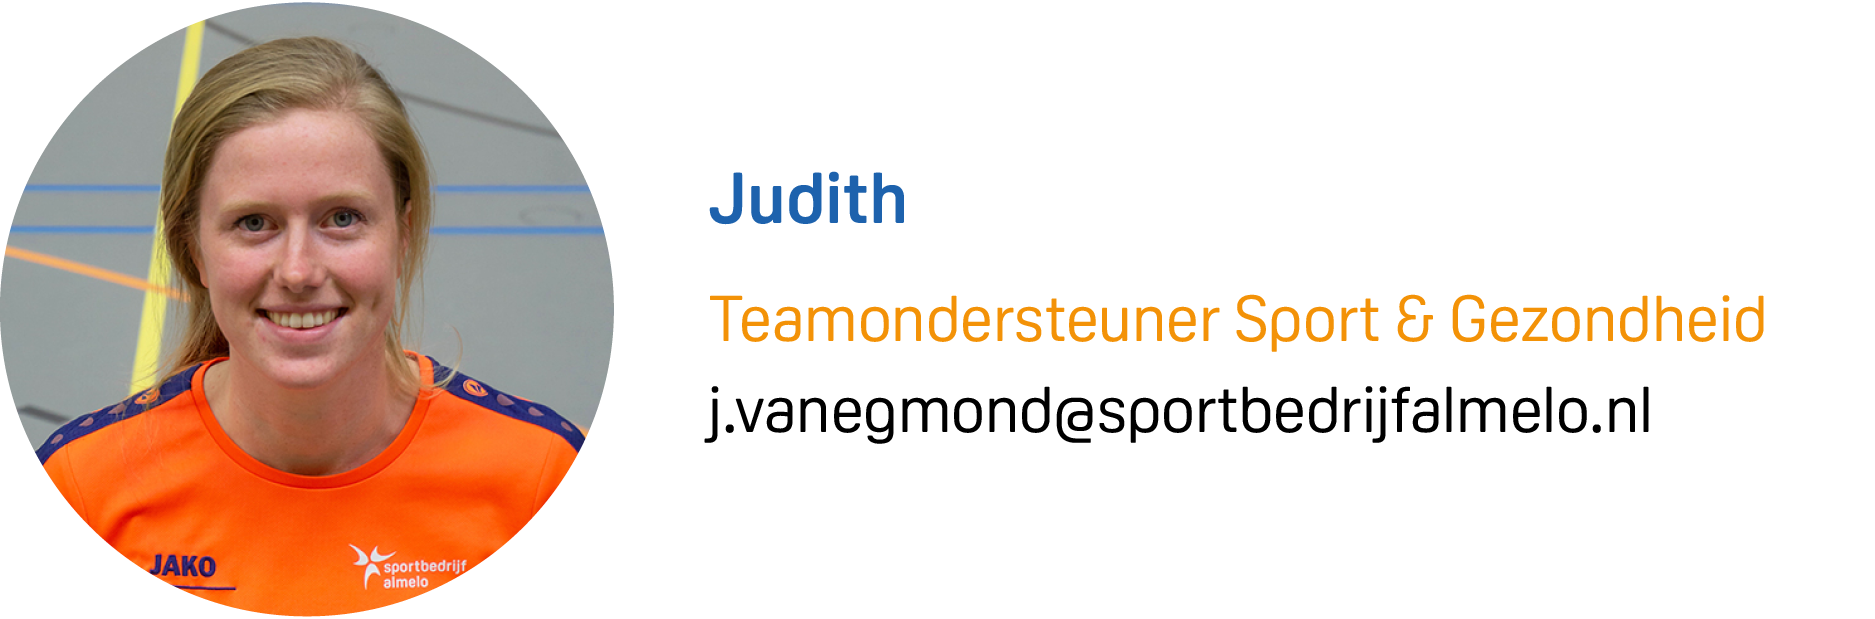 Judith Visite MAIL.png